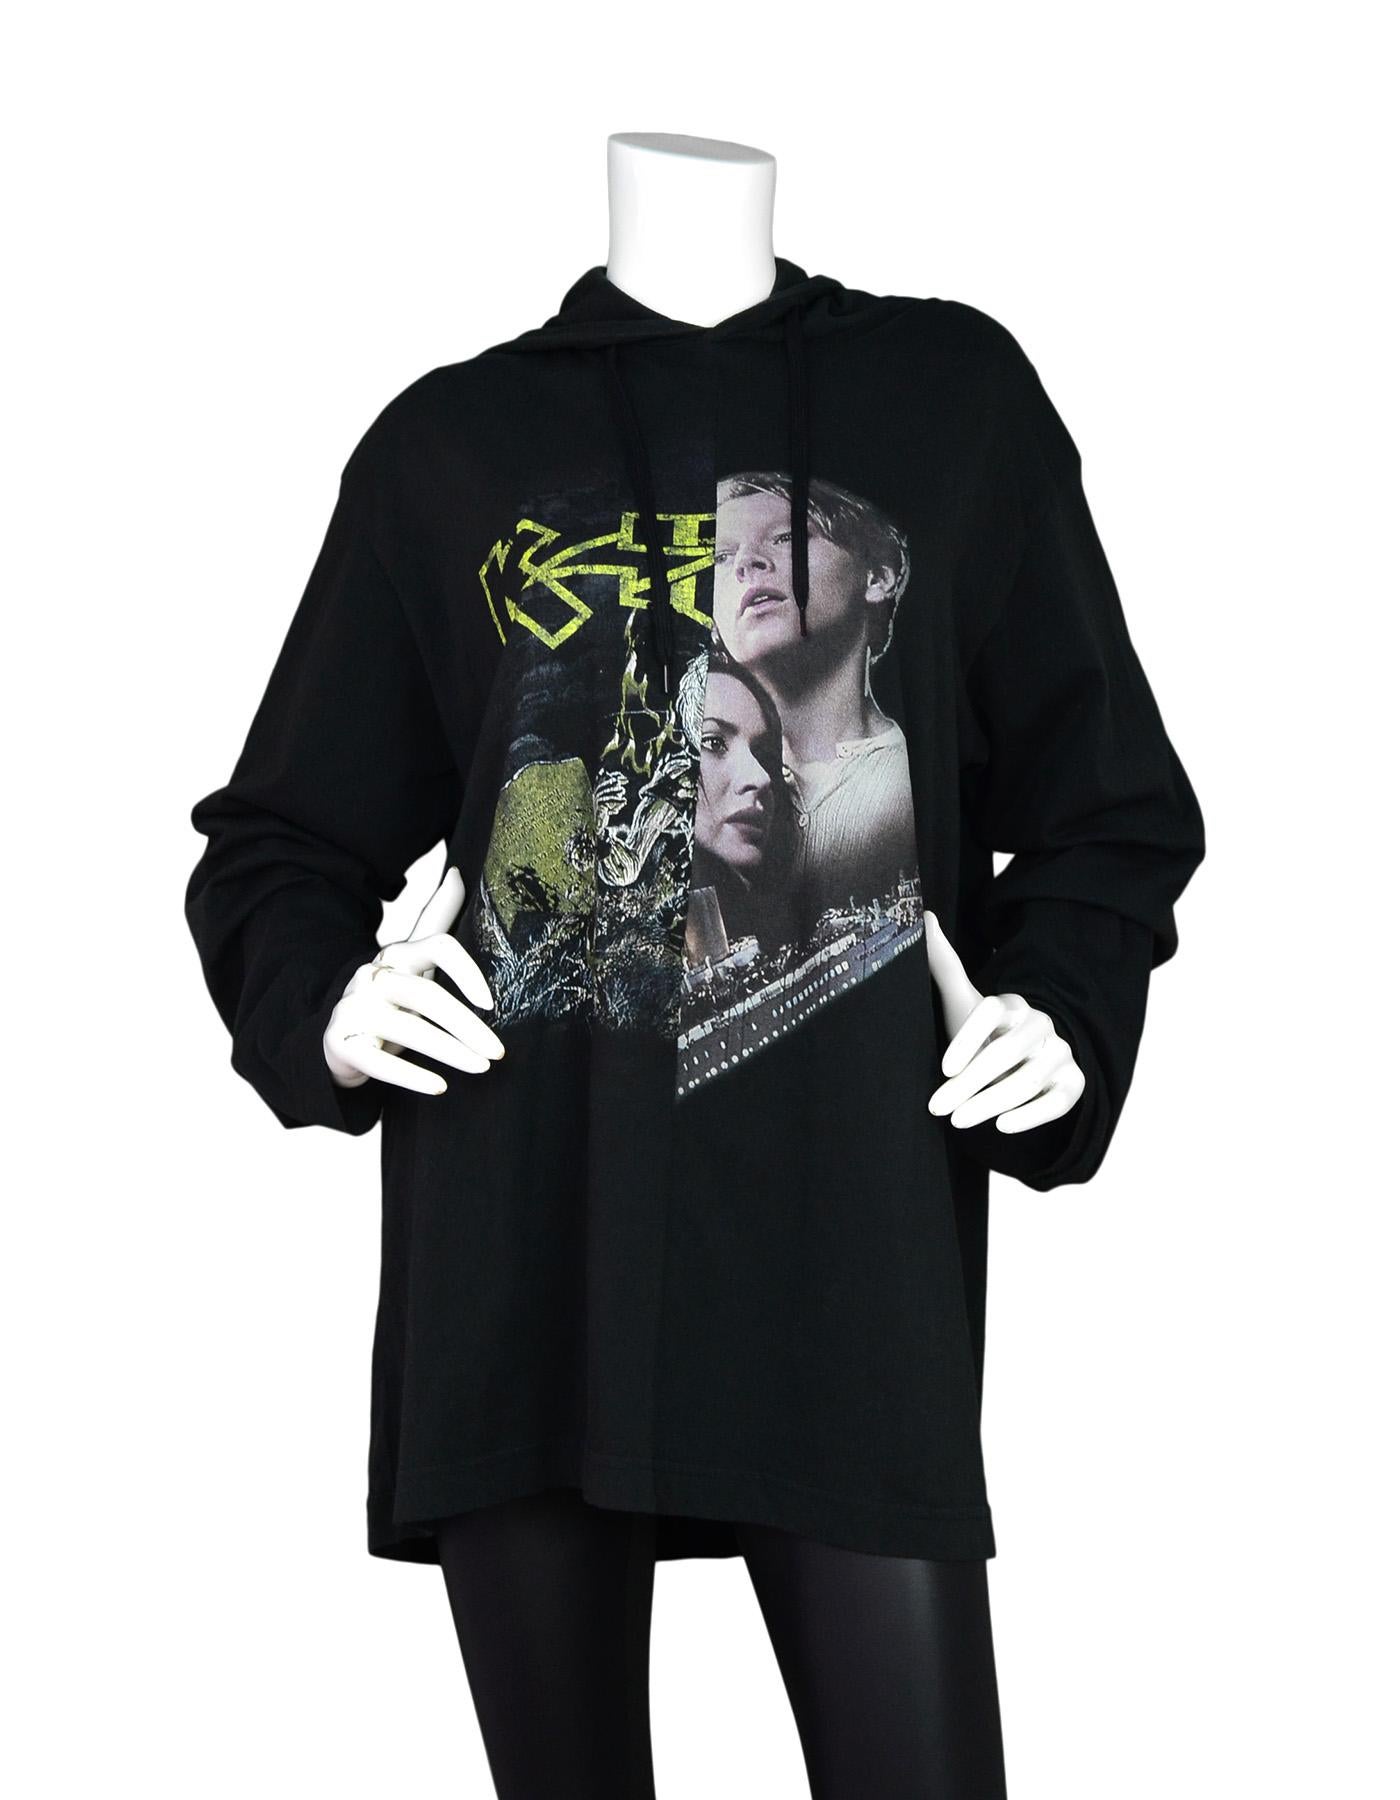 Vetements 2017 Black Graphic Kiss/Titanic Oversized Cotton Hoodie Sweatshirt Top, sz S

Made In: Portugal
Year of Production: 2017
Color: Black, yellow, white
Materials: 100% Cotton
Overall Condition: Excellent pre-owned condition 
Estimated Retail: